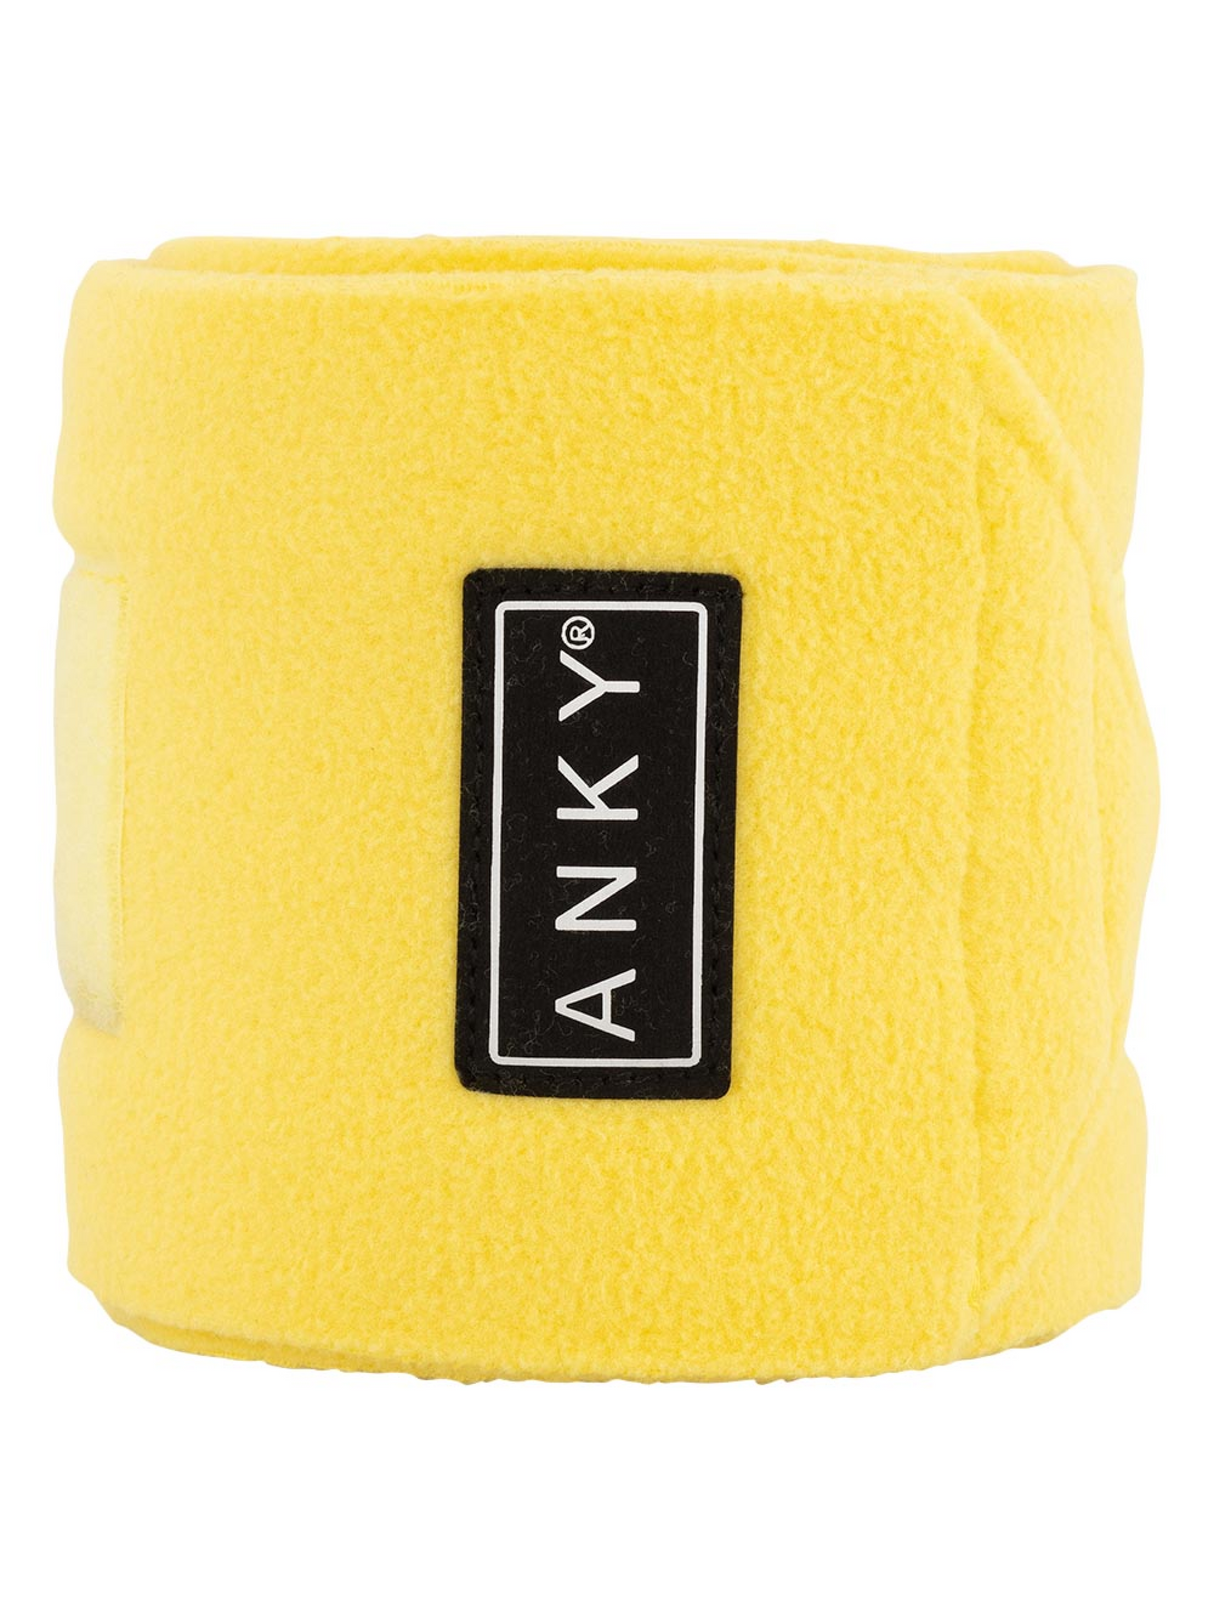 ANKY SS23 Bandages Yellow Tale